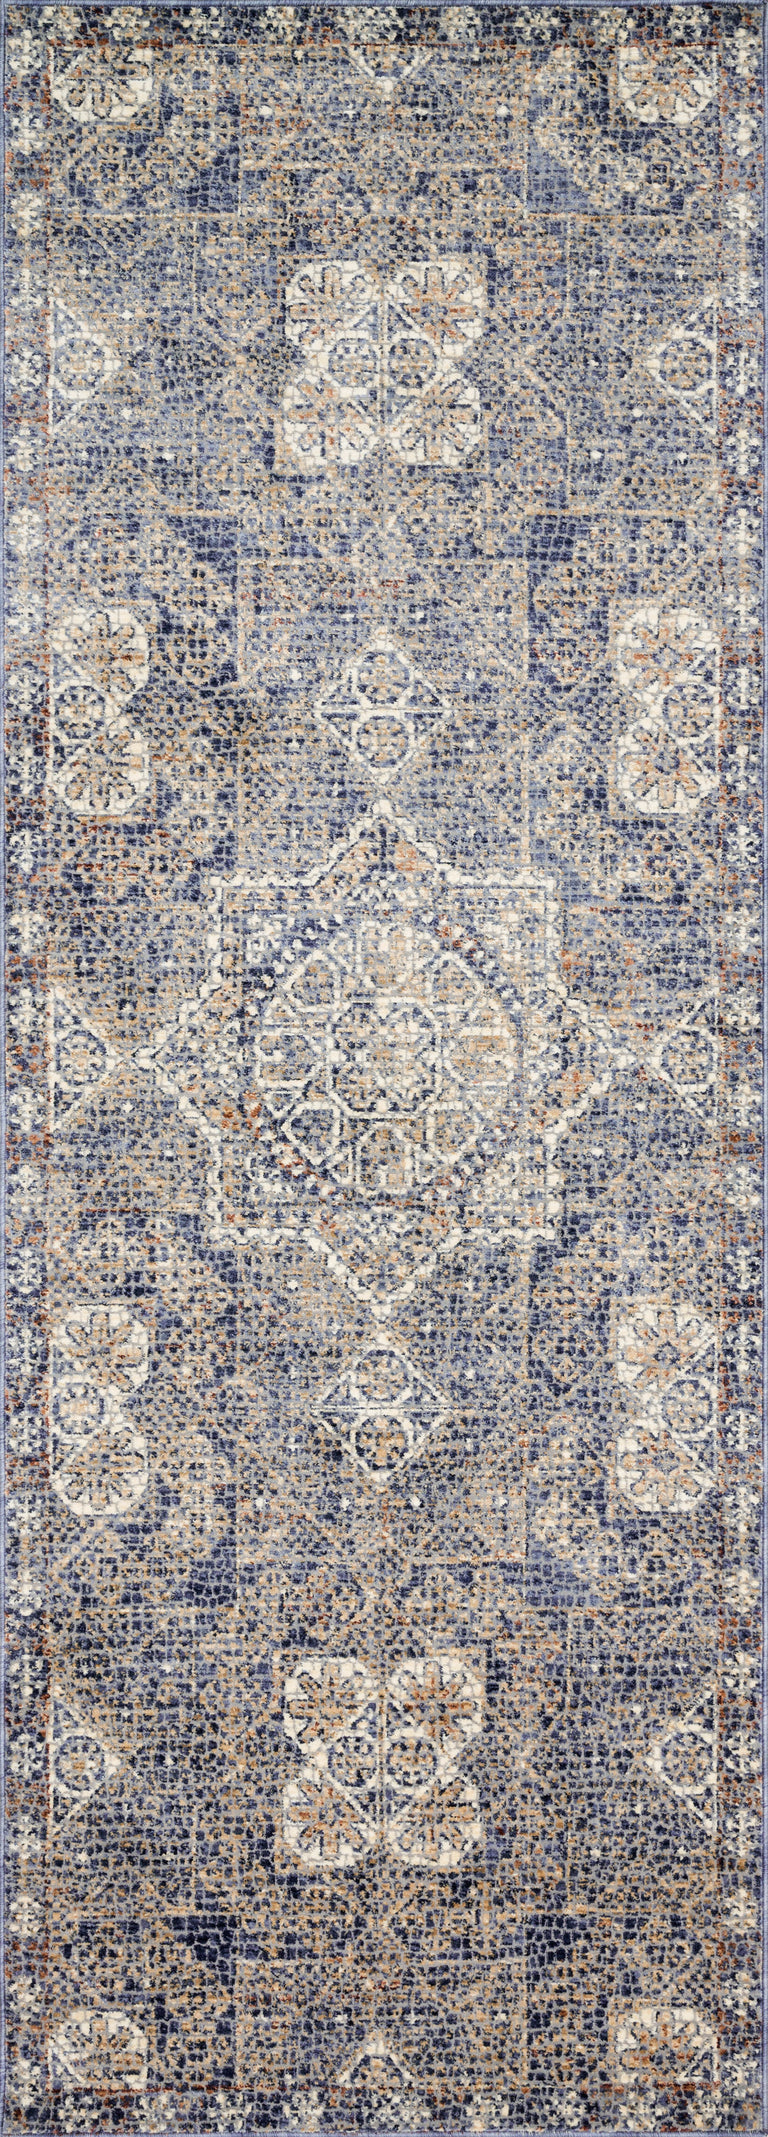 Loloi Rugs Porcia Collection Rug in Blue, Blue - 12'0" x 15'0", PORCPB-02BBBBC0F0